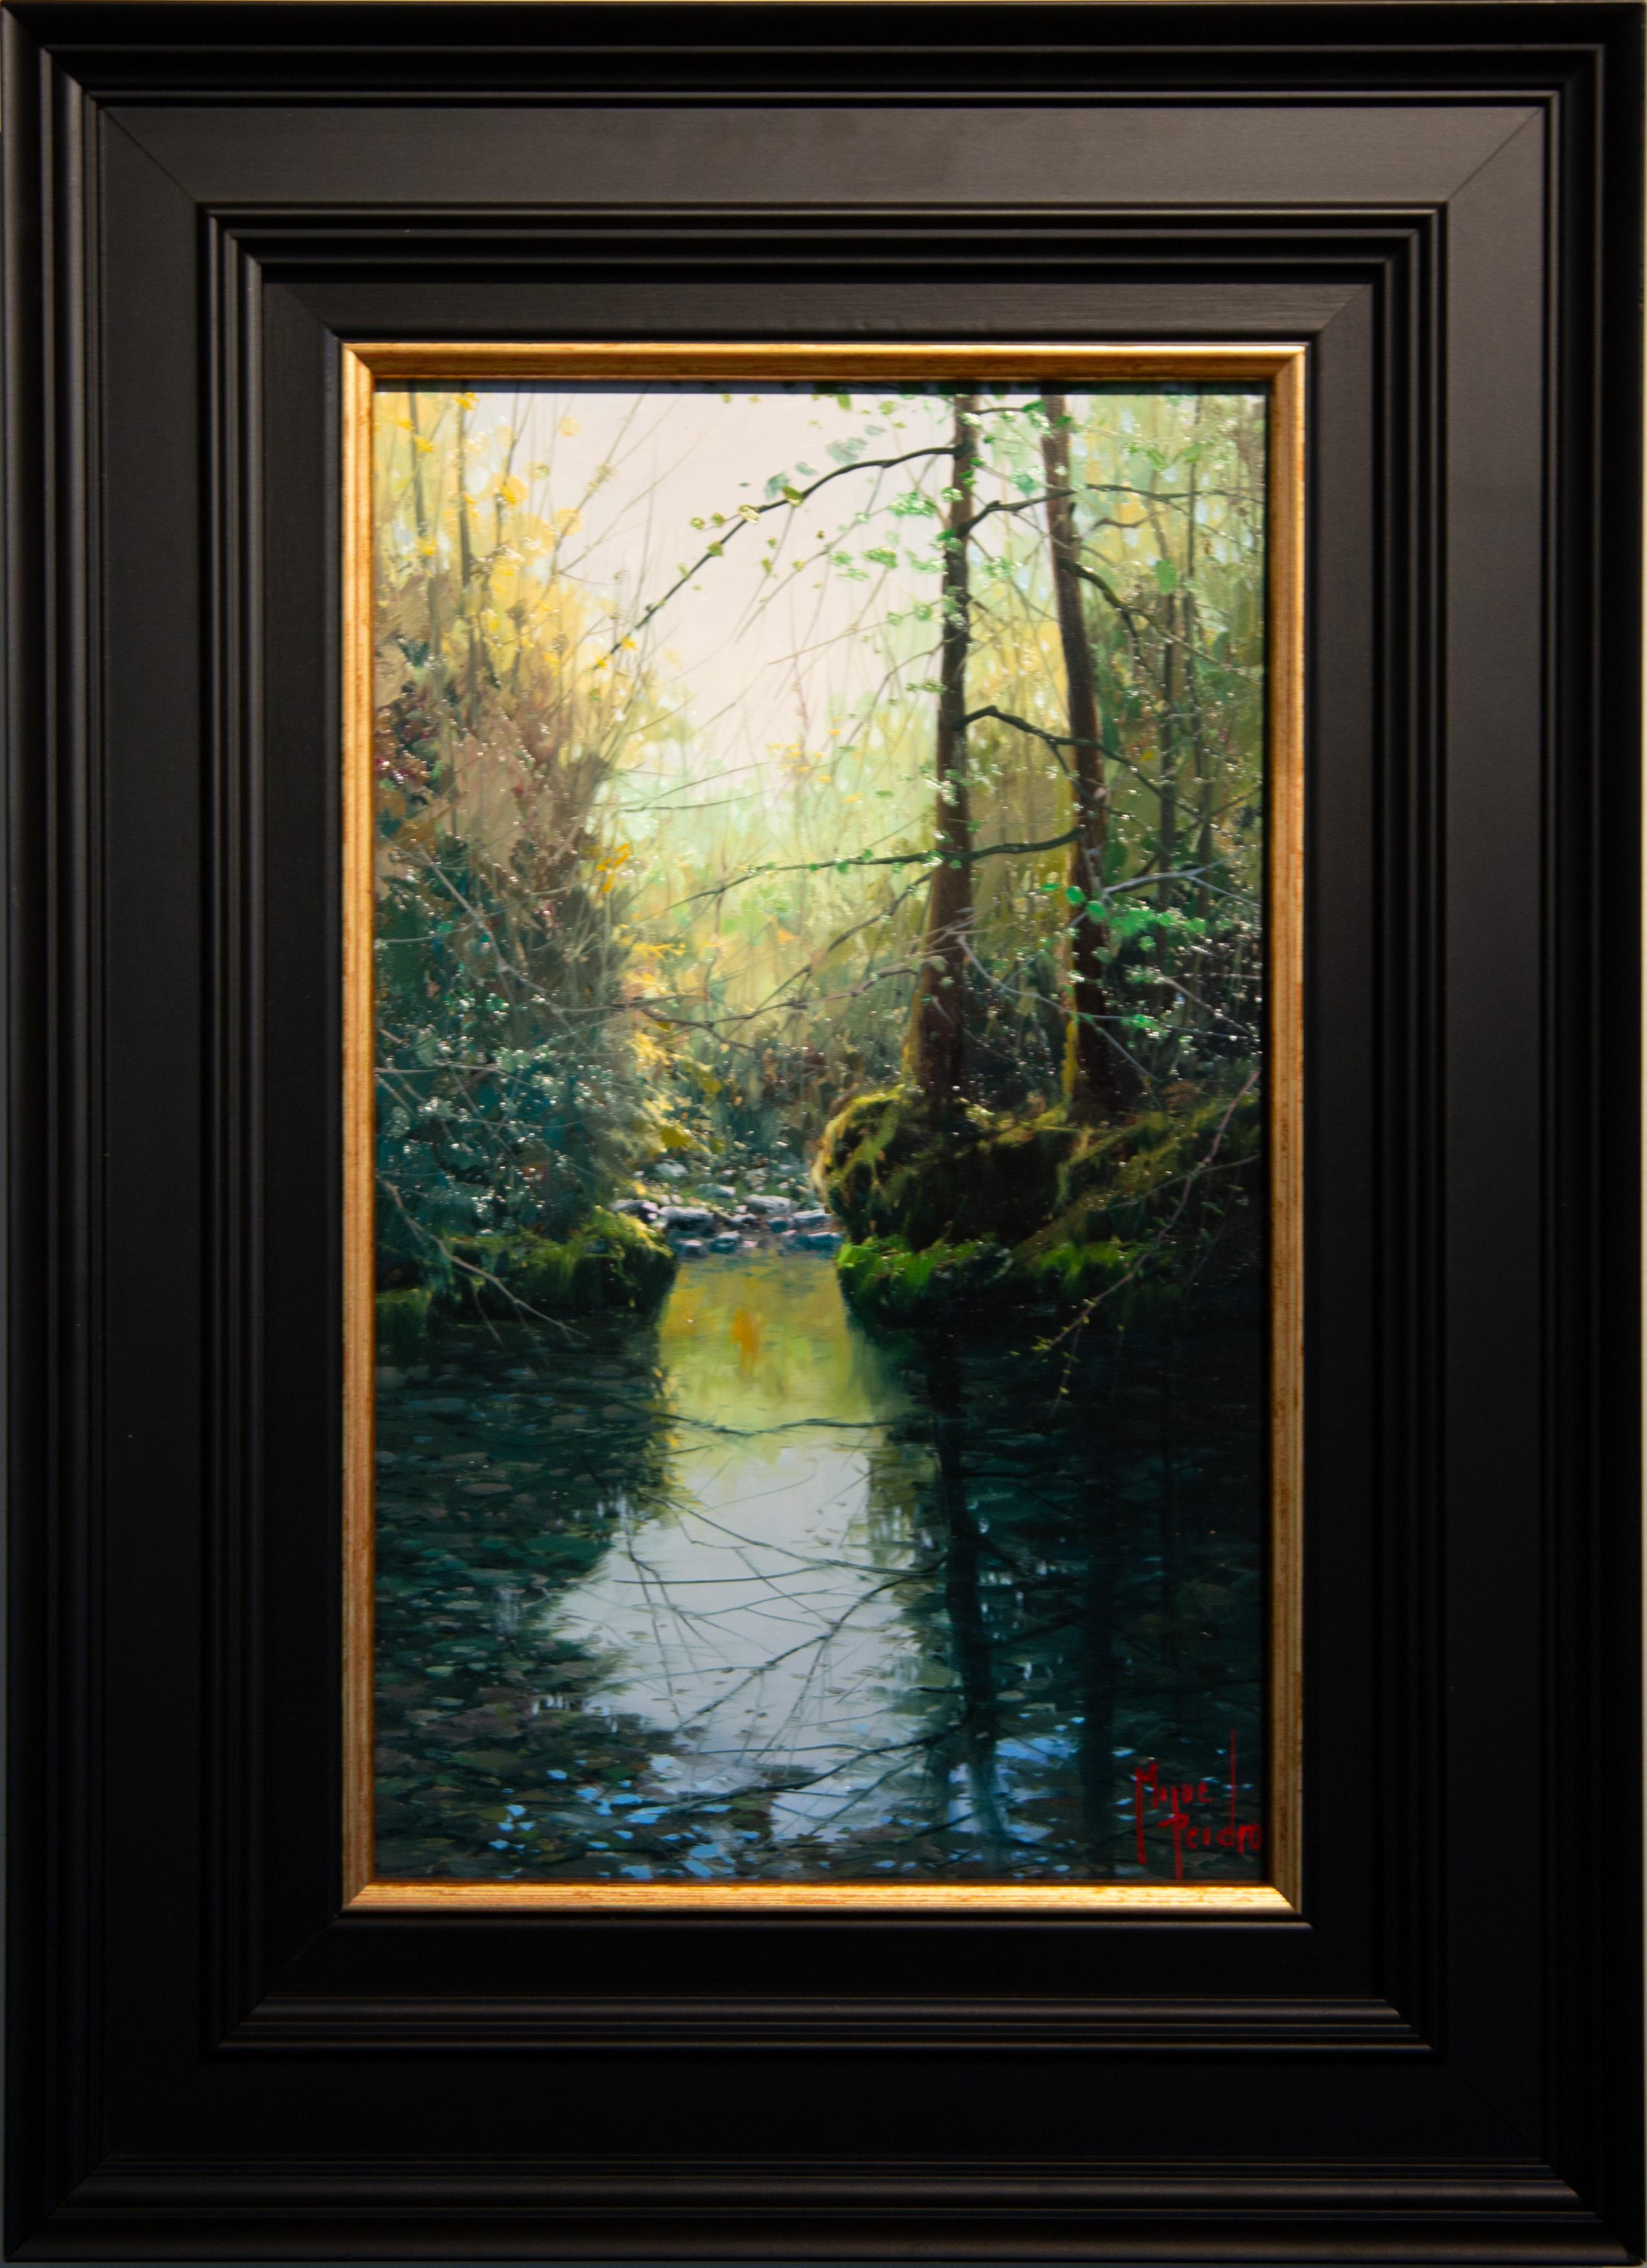 Miguel Piedro Landscape Painting - 'Tranquility' contemporary photorealist painting of the woods, river, trees